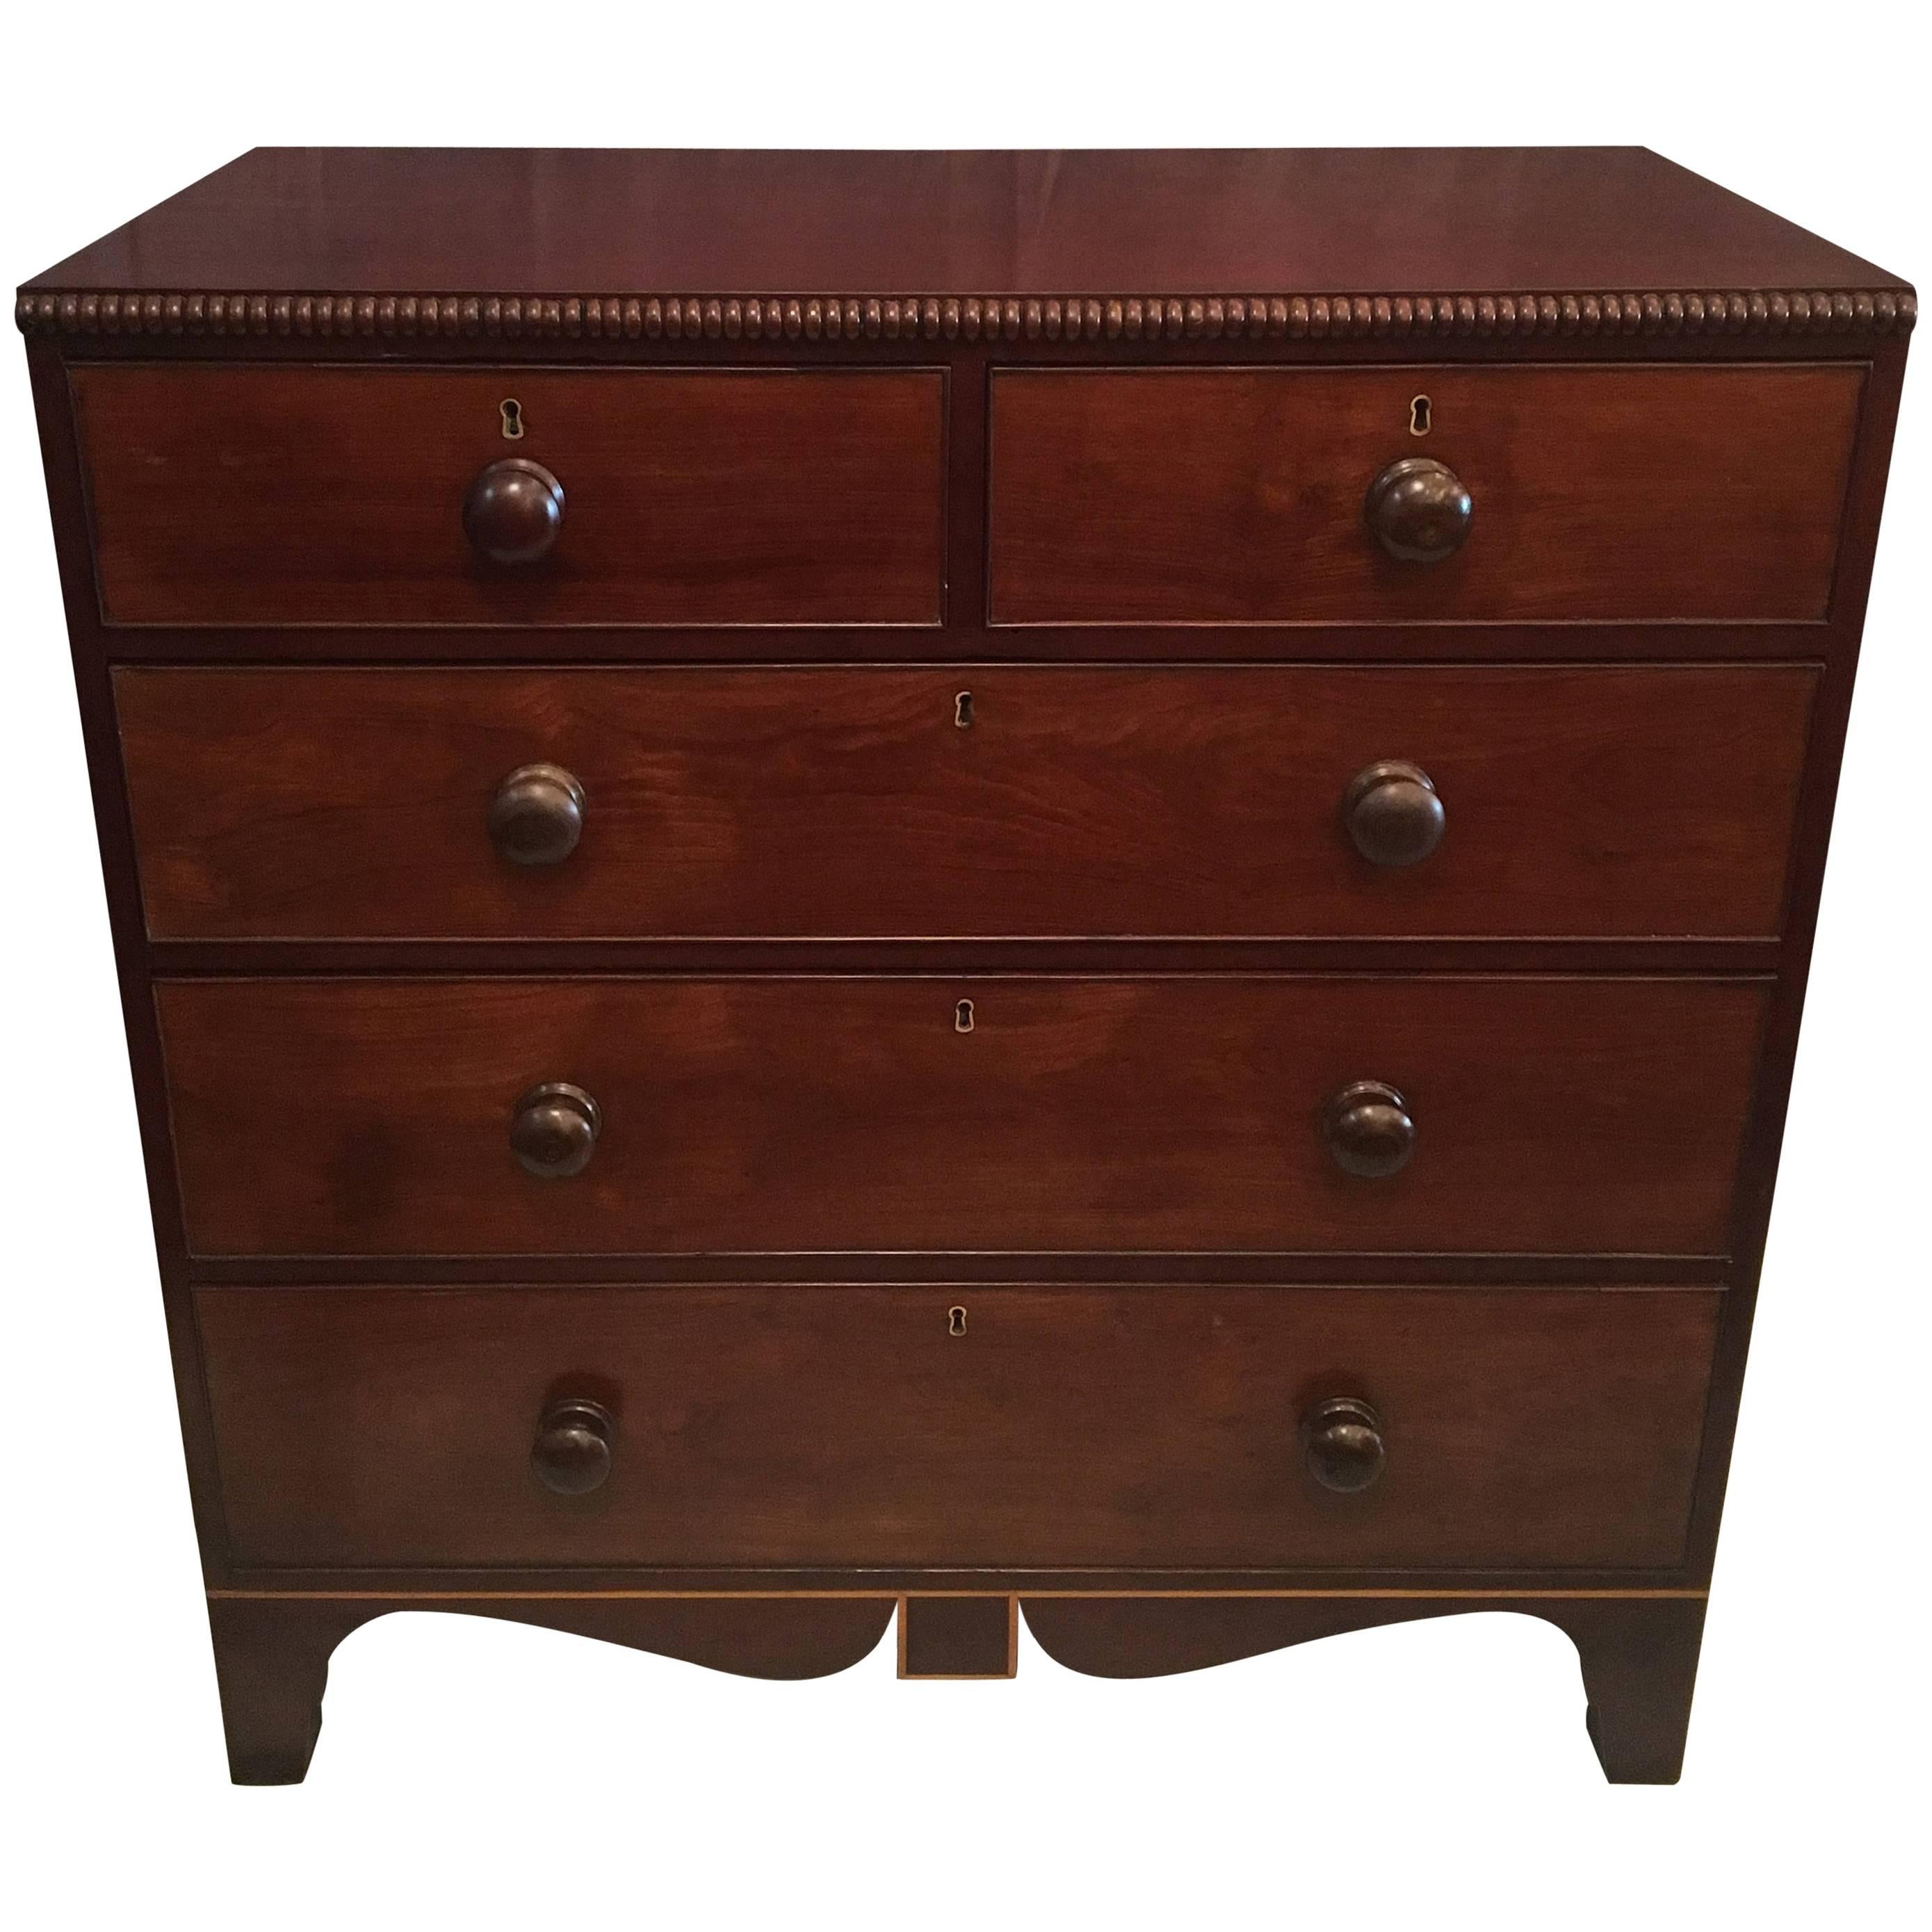 Early 19th Century Jamaican Regency Chest